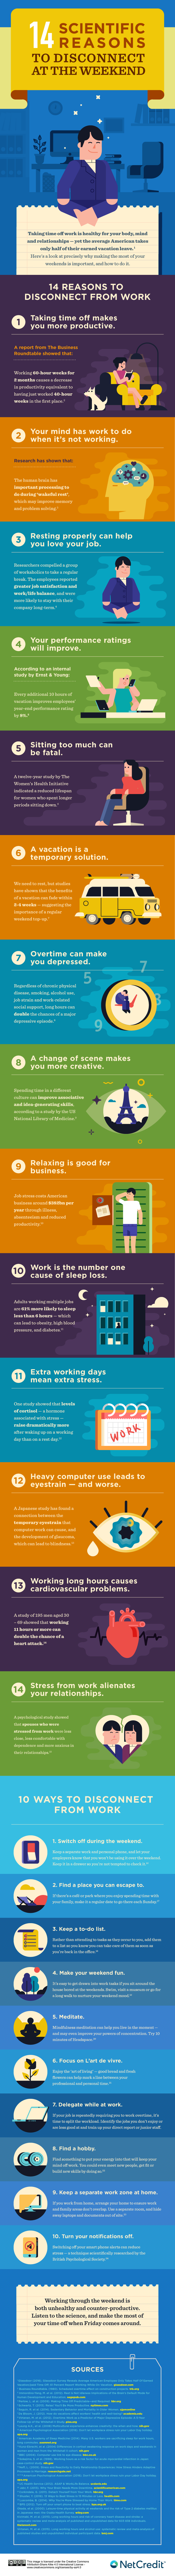 The Importance Of Taking Time Off: Why Overworking Can Be Dangerous Infographic